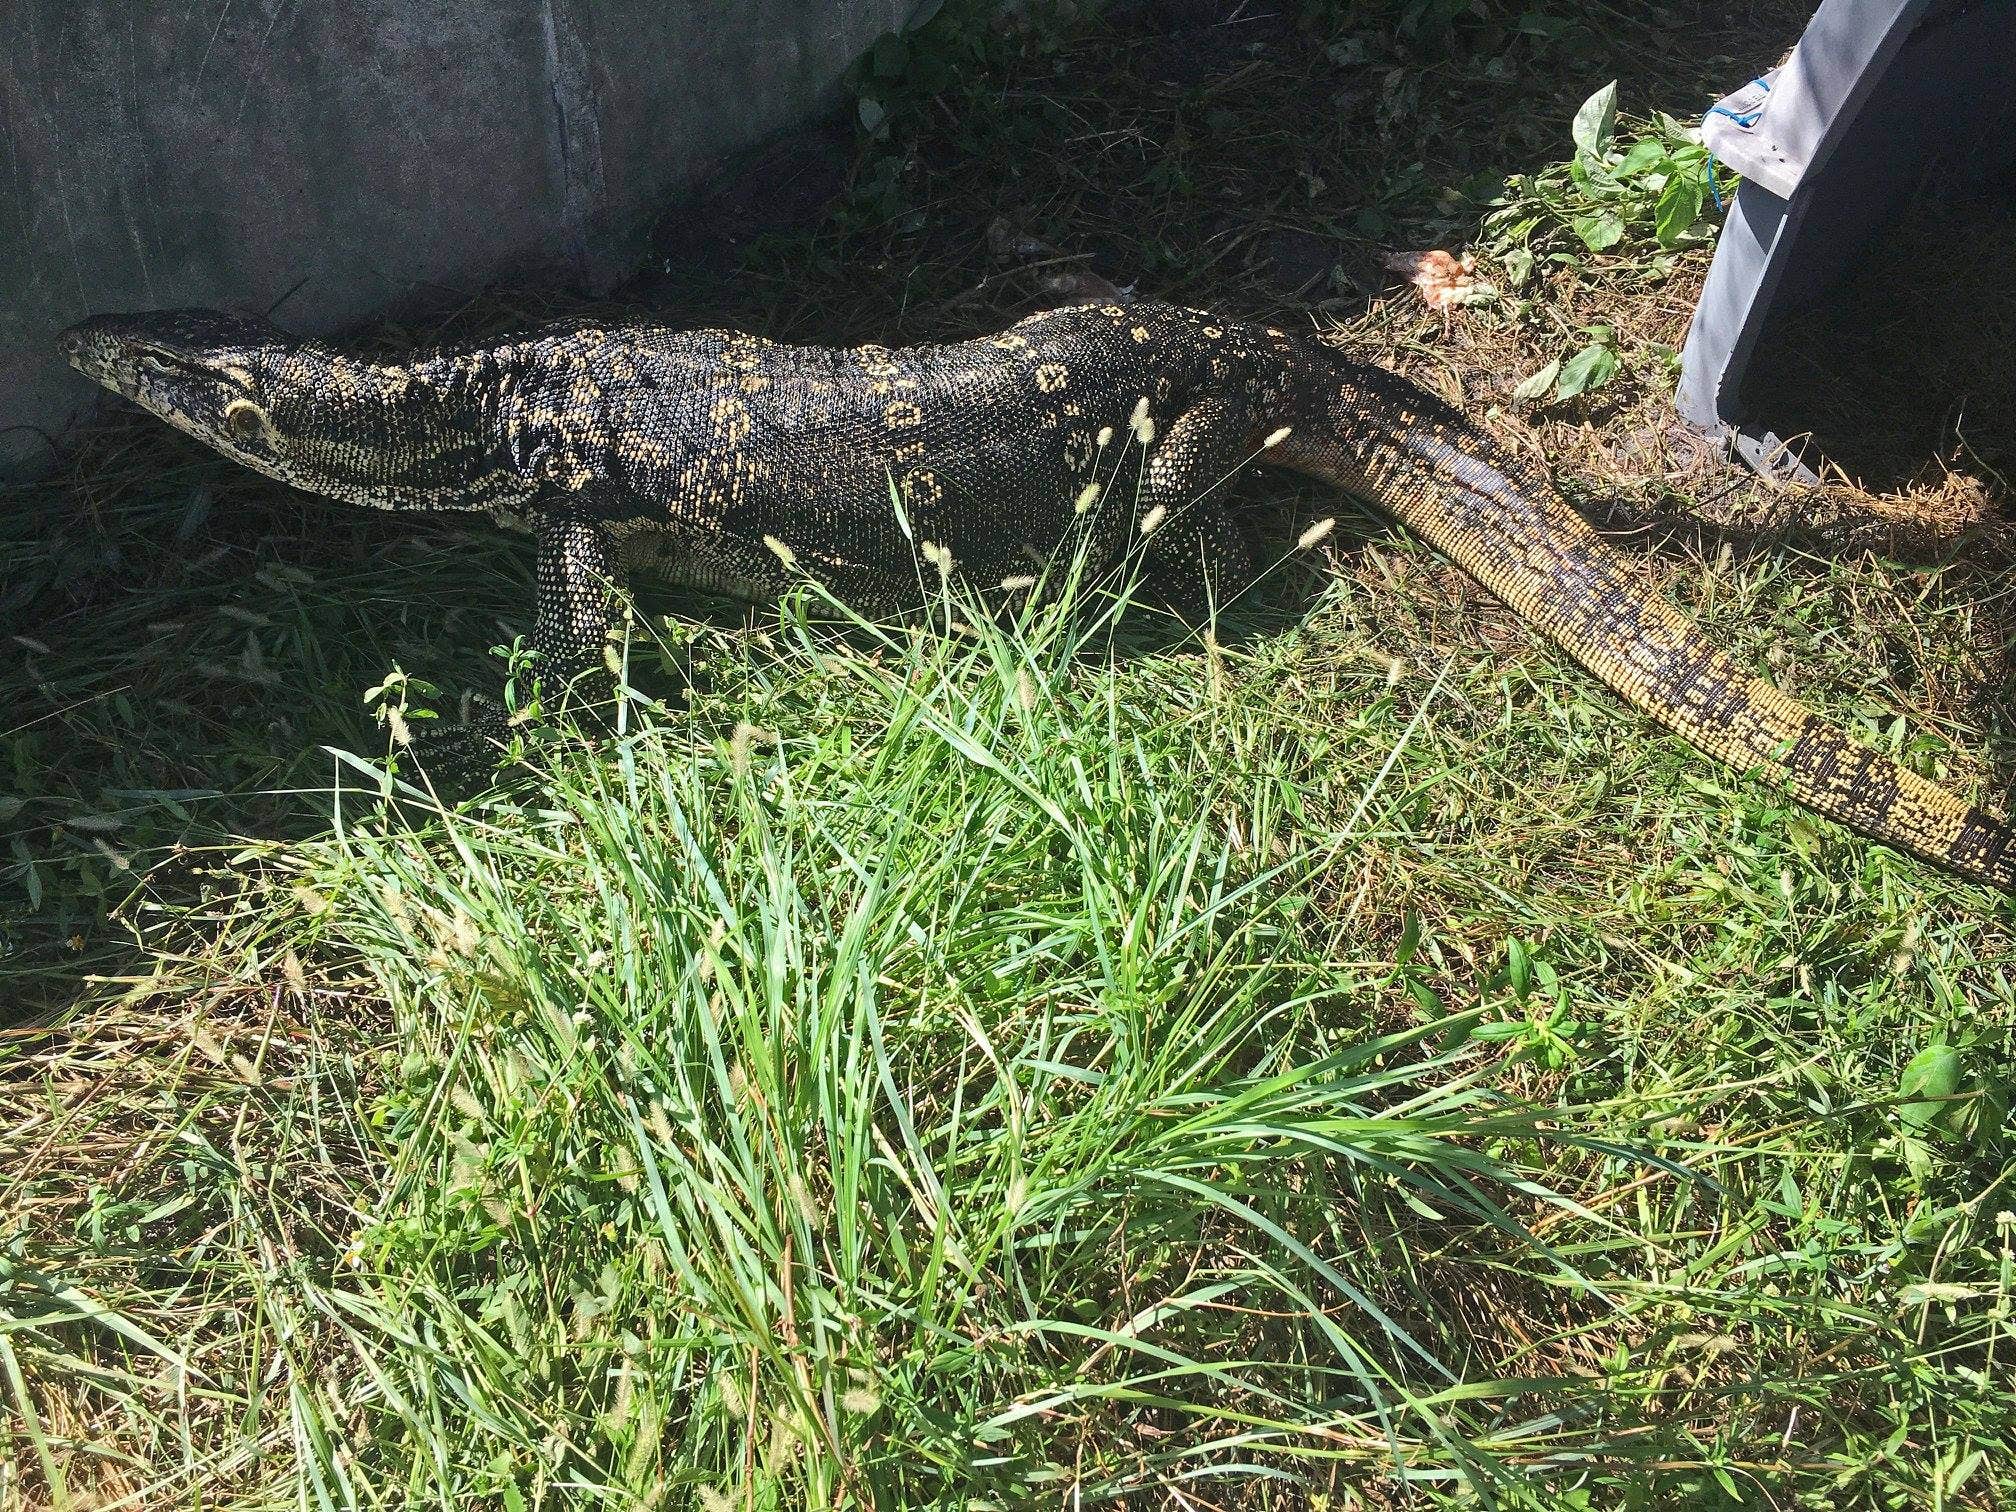 Giant lizard in Florida captured months after terrorizing family